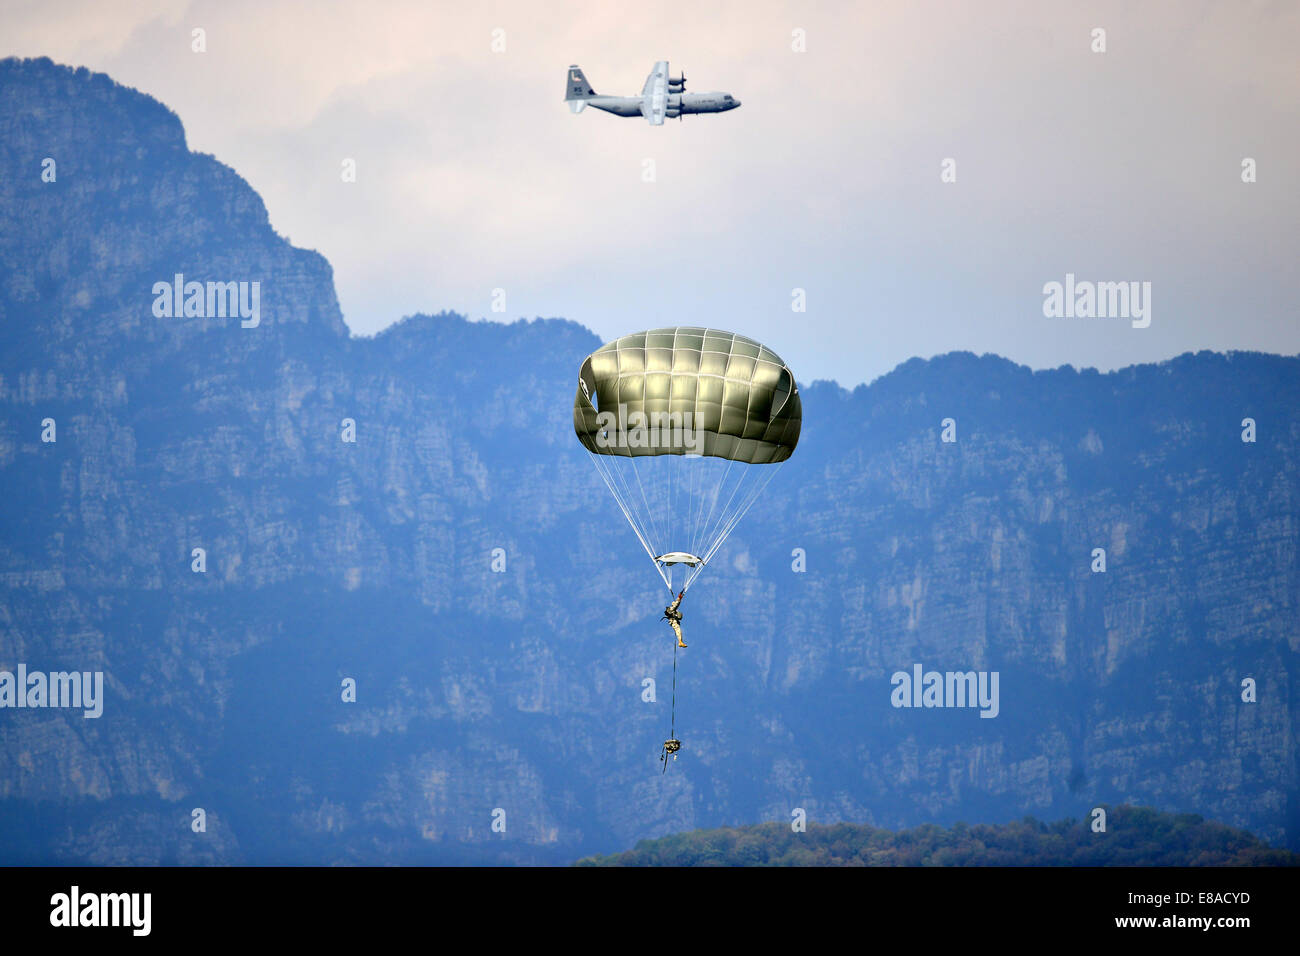 A U.S. Army paratrooper assigned to the 173rd Brigade Support Battalion, 173rd Airborne Brigade Combat Team lands after a jump at Juliet Drop Zone in Pordenone, Italy, Sept. 24, 2014. U.S. Soldiers conducted an airborne operation with T-11 parachutes from Stock Photo